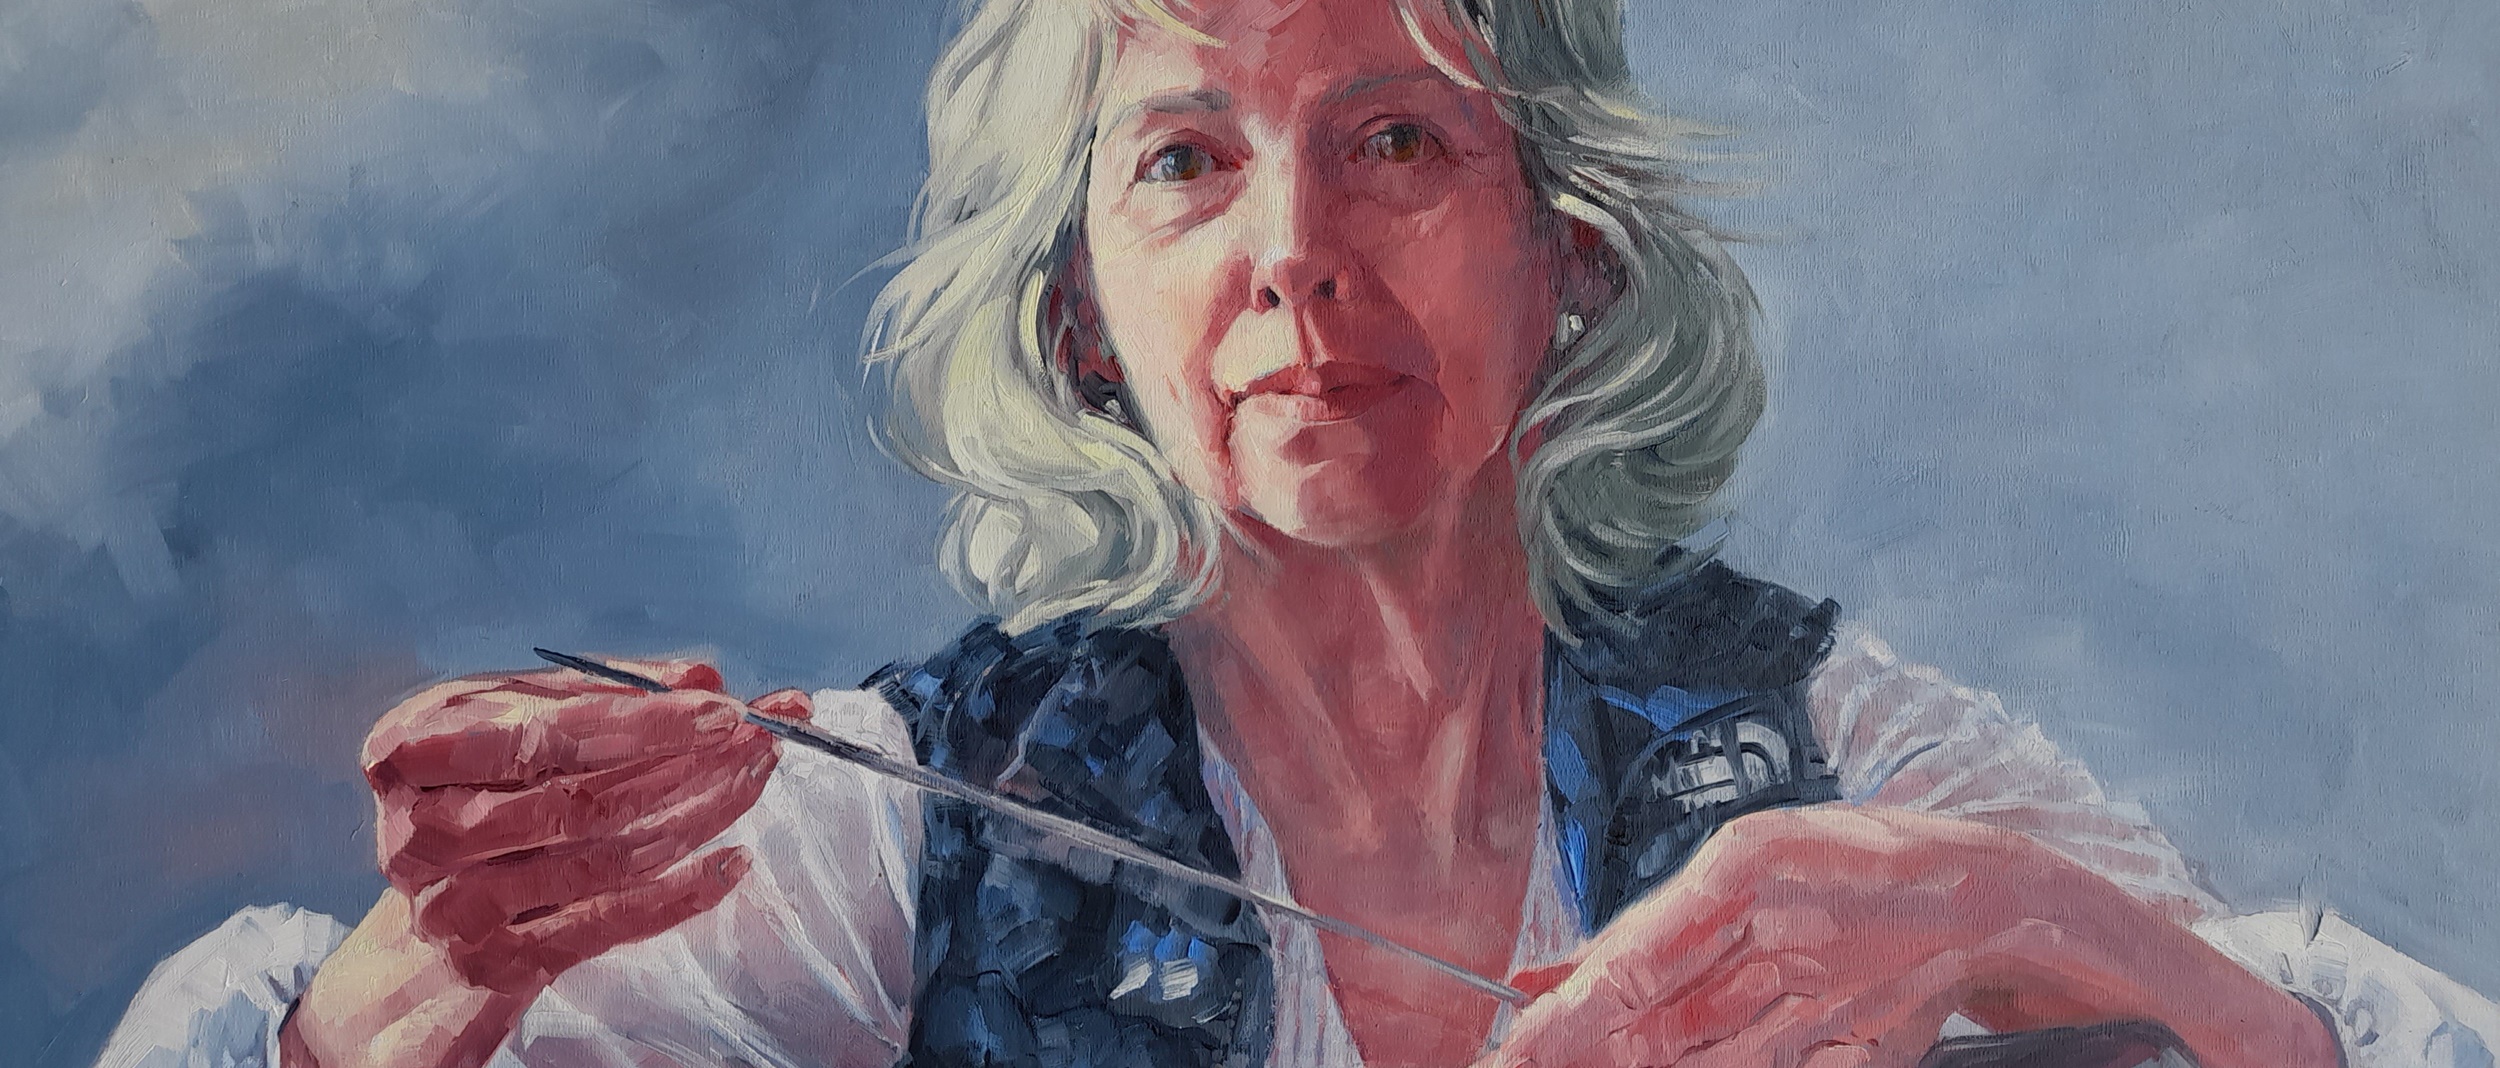 Artist Beverley Fry will be featured in The Darwin Gallery at Halls Fine Art, Battlefield with a new Retrospective Exhibition from June 5th - 30th, 2023